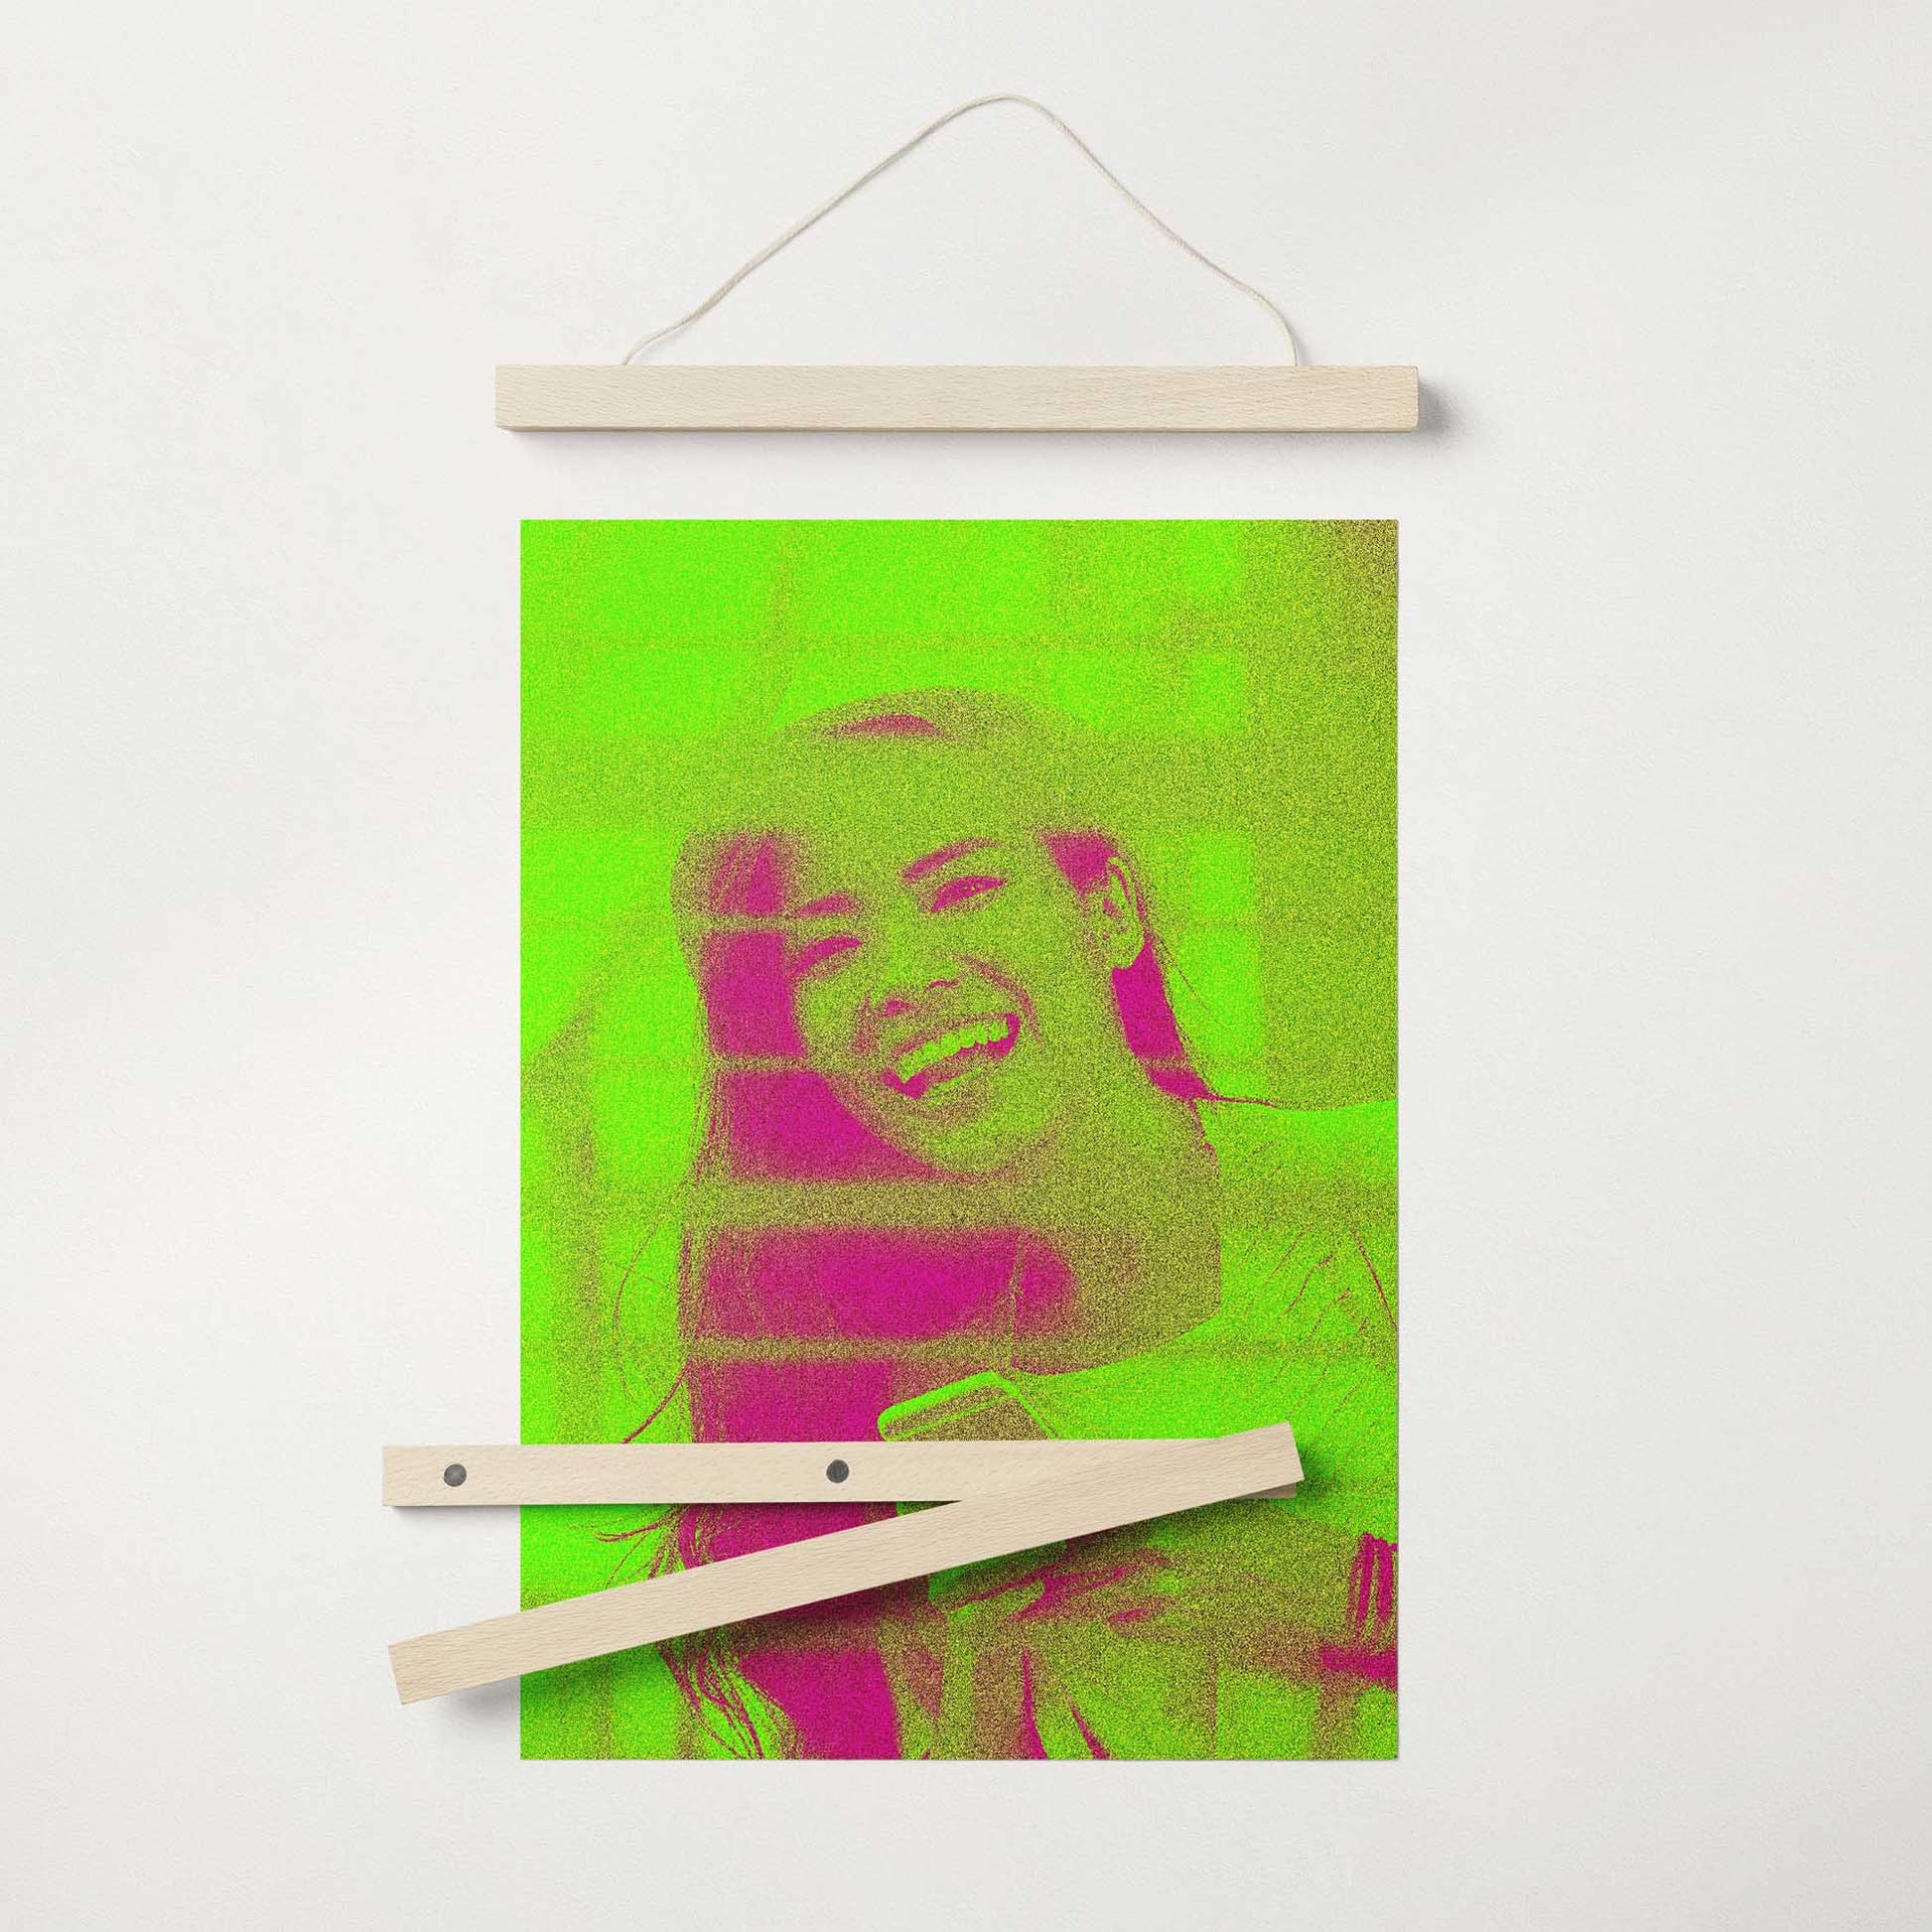 Unleash your creativity with our Personalised Neon Green Poster Hanger. The neon green color and cool texture make it an exciting and eye-catching addition to your home decor. Crafted on gallery paper and framed with a natural wood frame